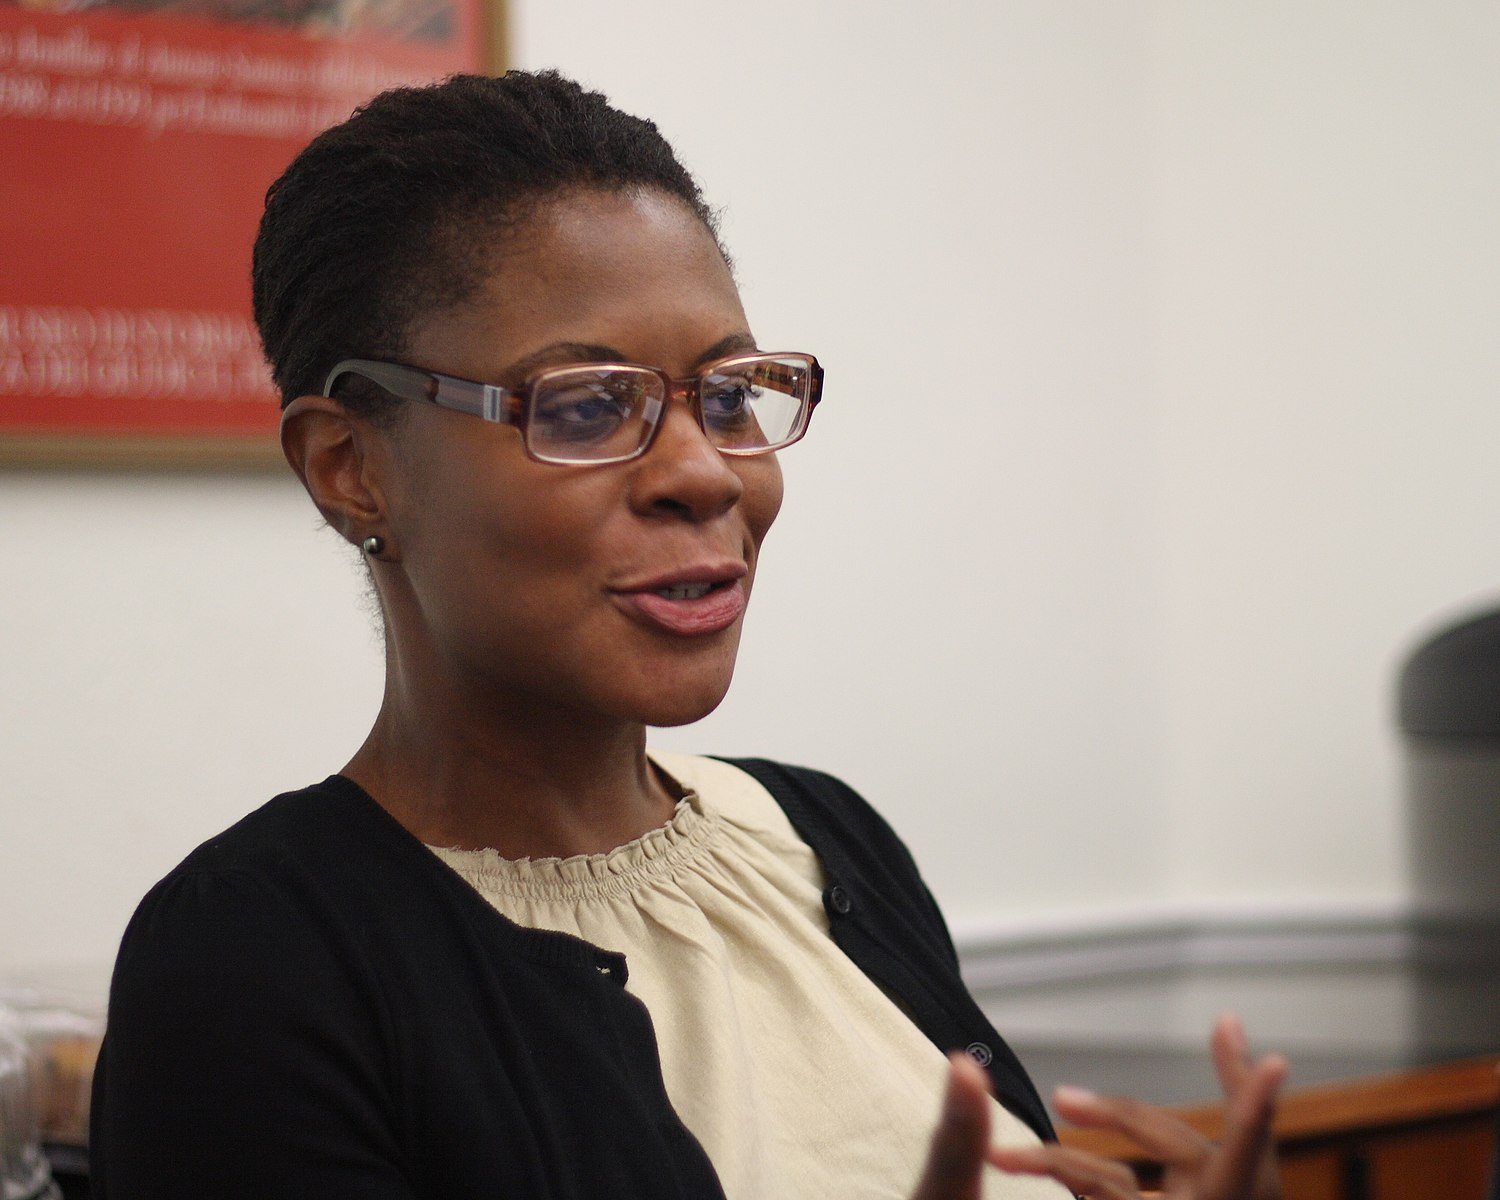 an image of the scholar Alondra Nelson wearing a beige blouse and black cardigan